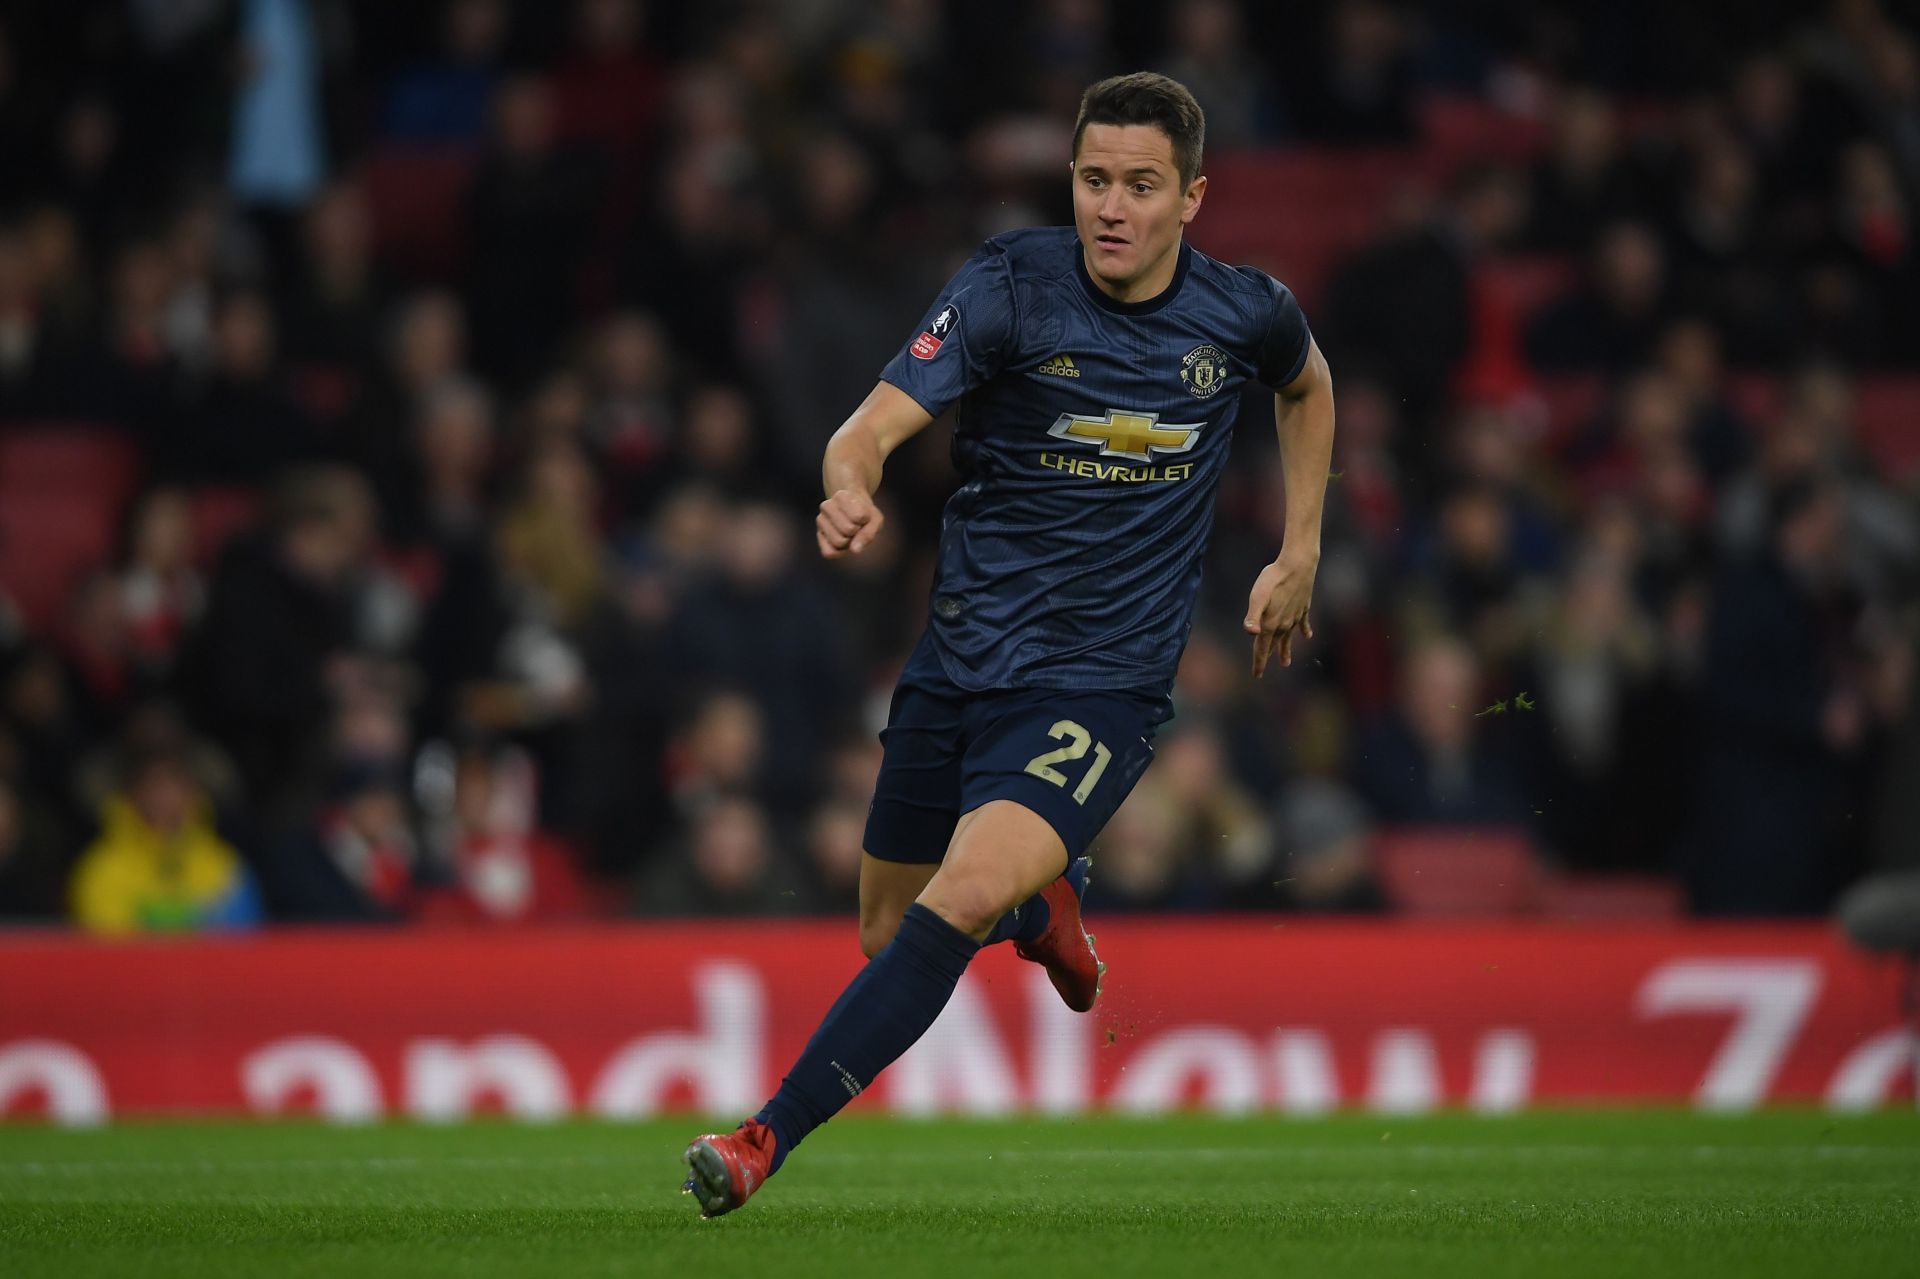 Ander Herrera was a leader in midfield for Manchester United.